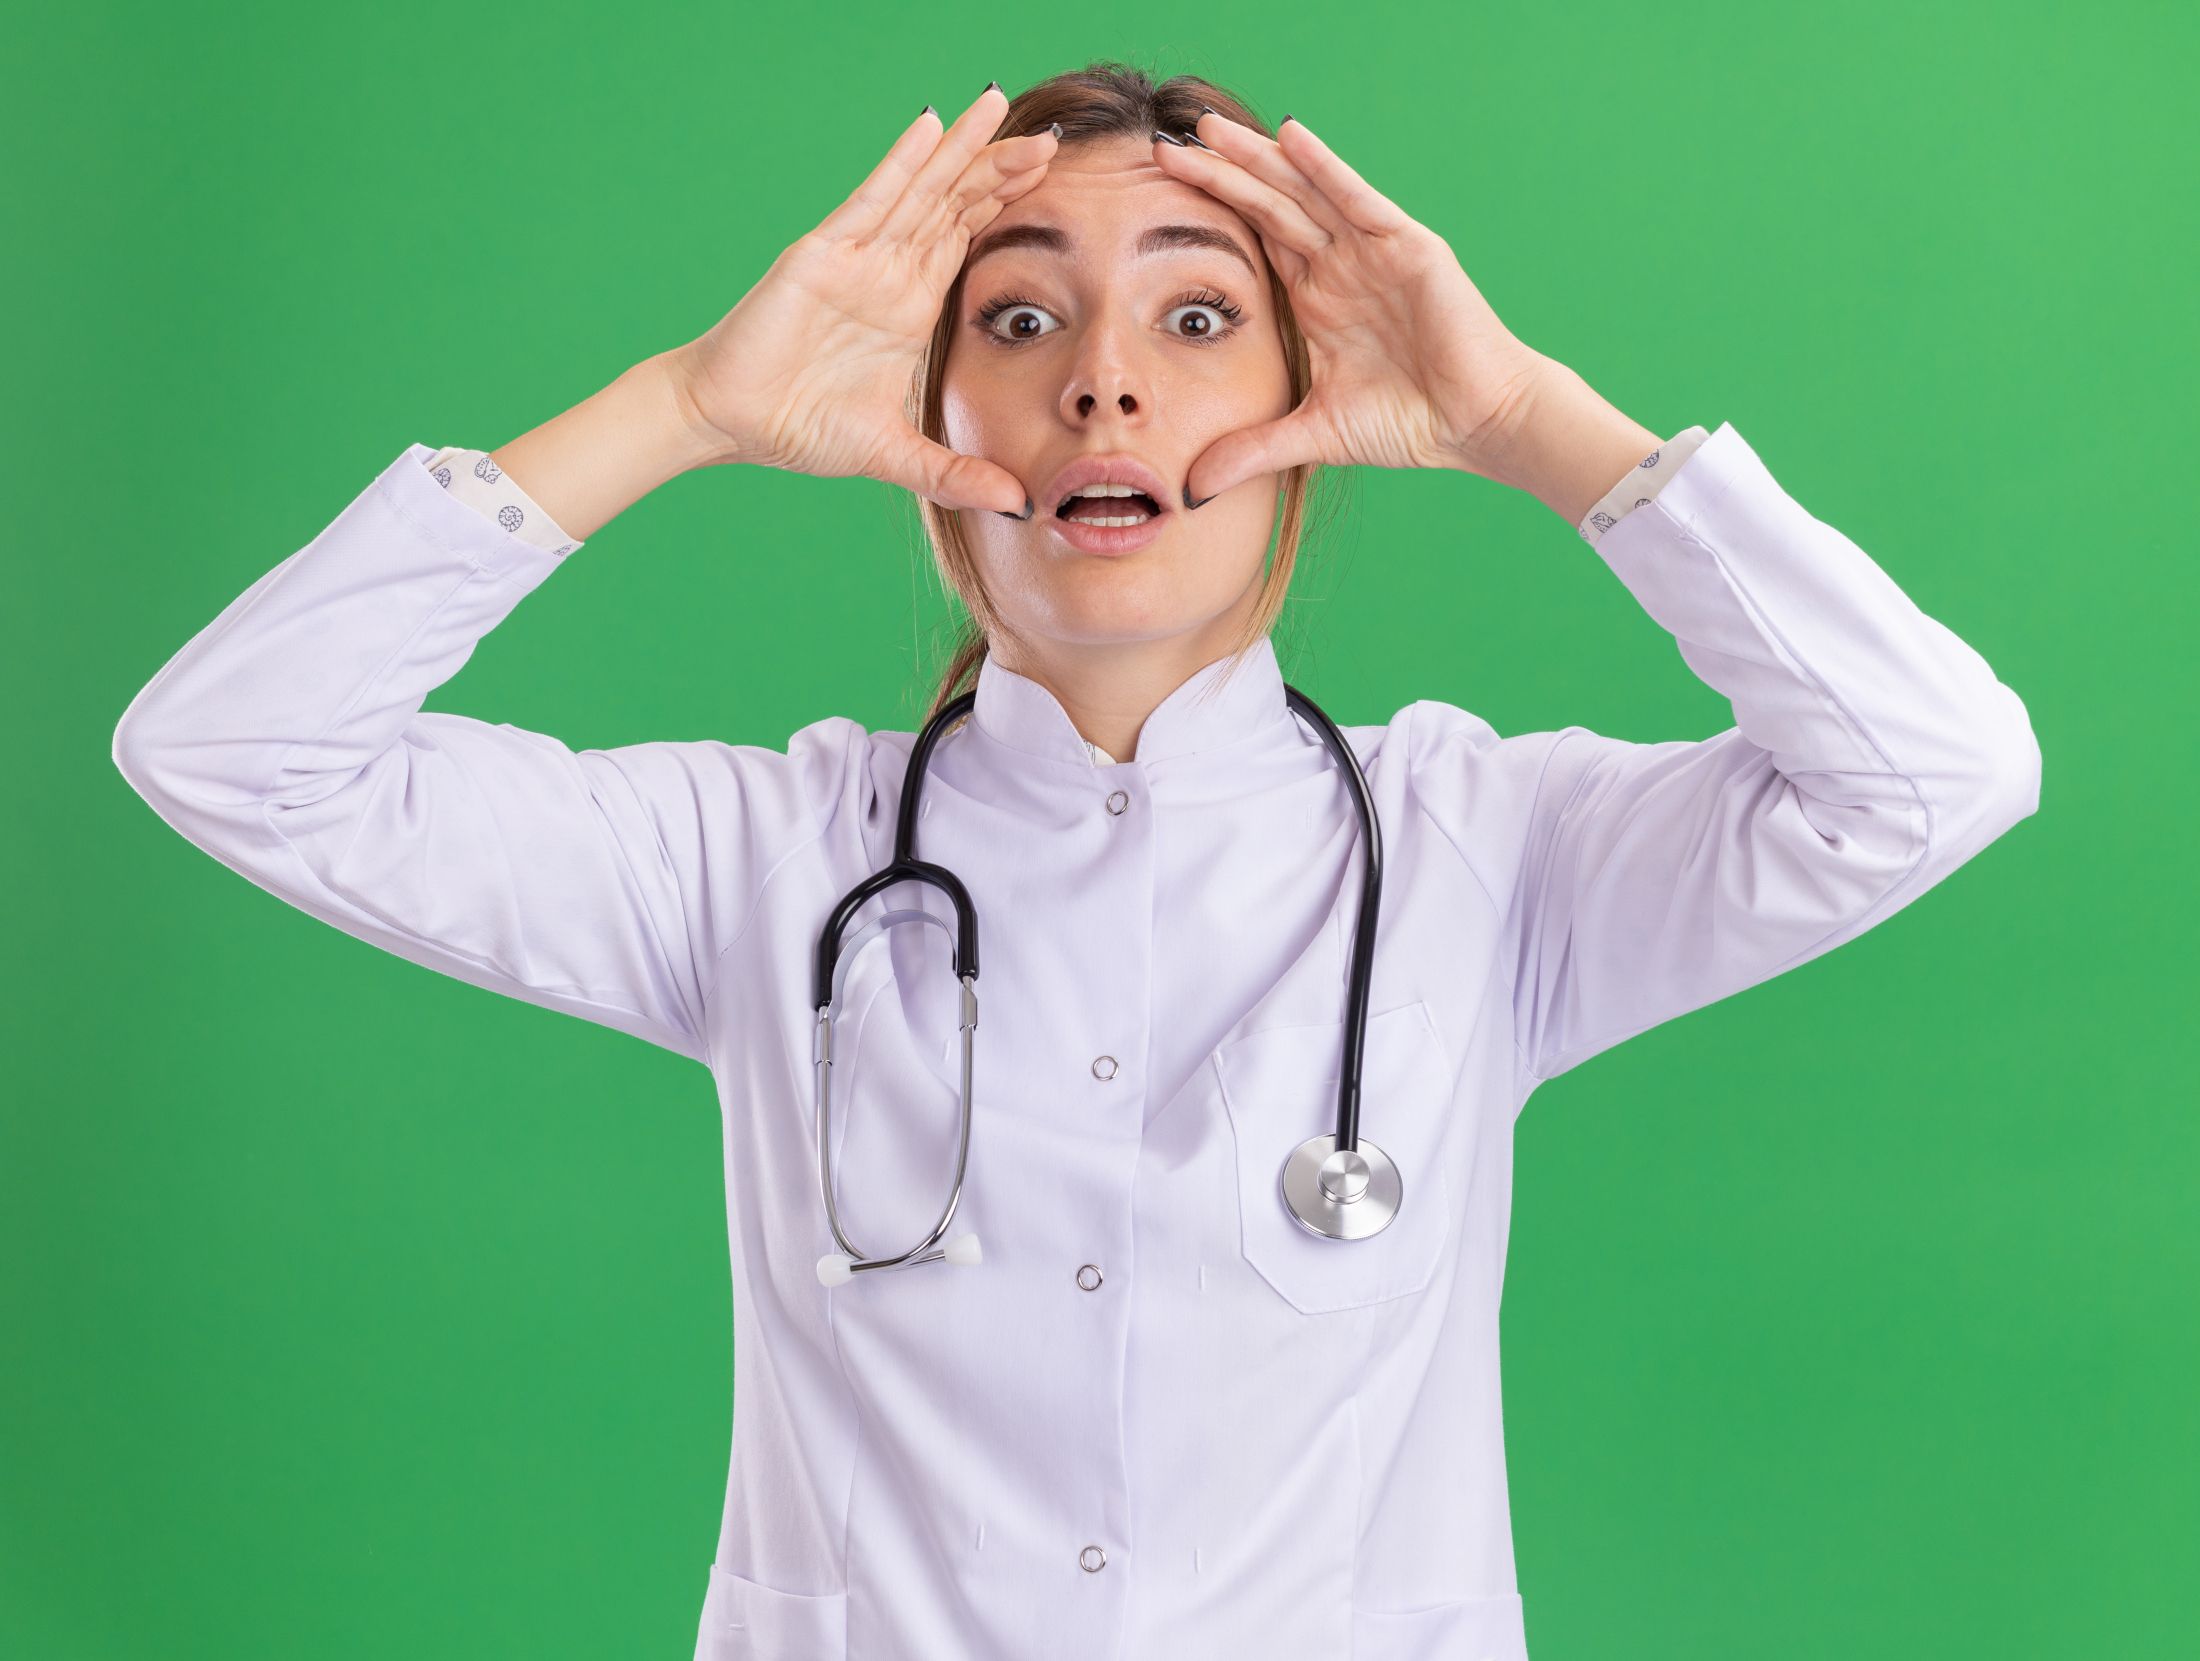 surprised-young-female-doctor-wearing-medical-robe-with-stethoscope-putting-hands-around-eyes-isolated-on-green-wall.jpg